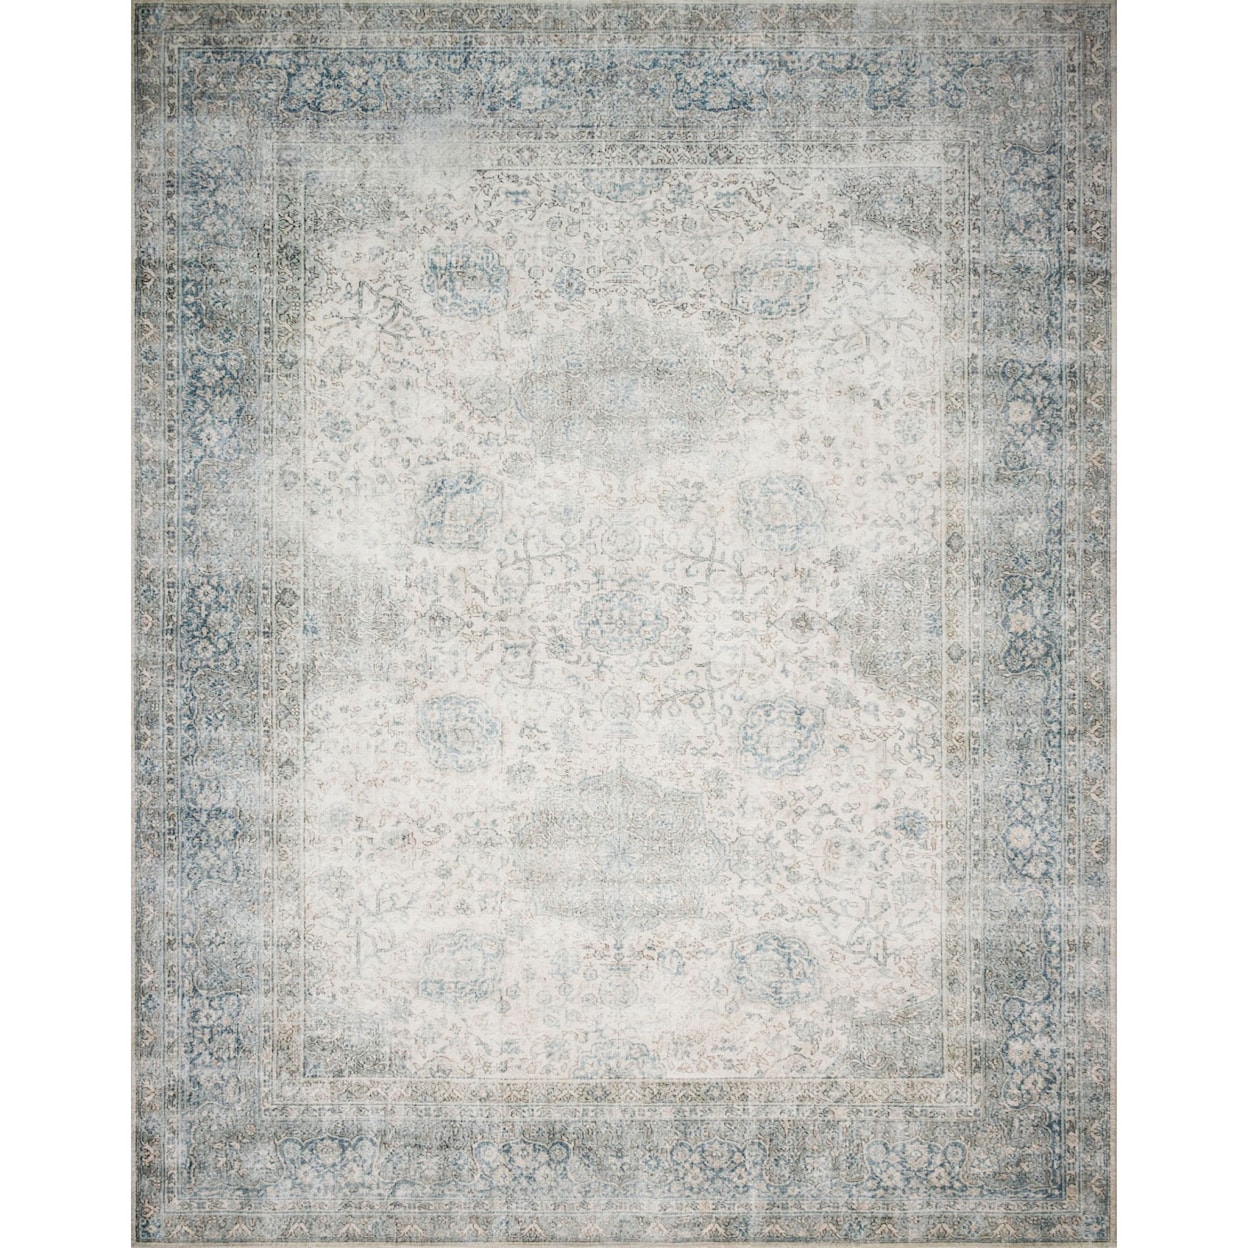 Magnolia Home by Joanna Gaines for Loloi Lucca 10' x 13' Rug